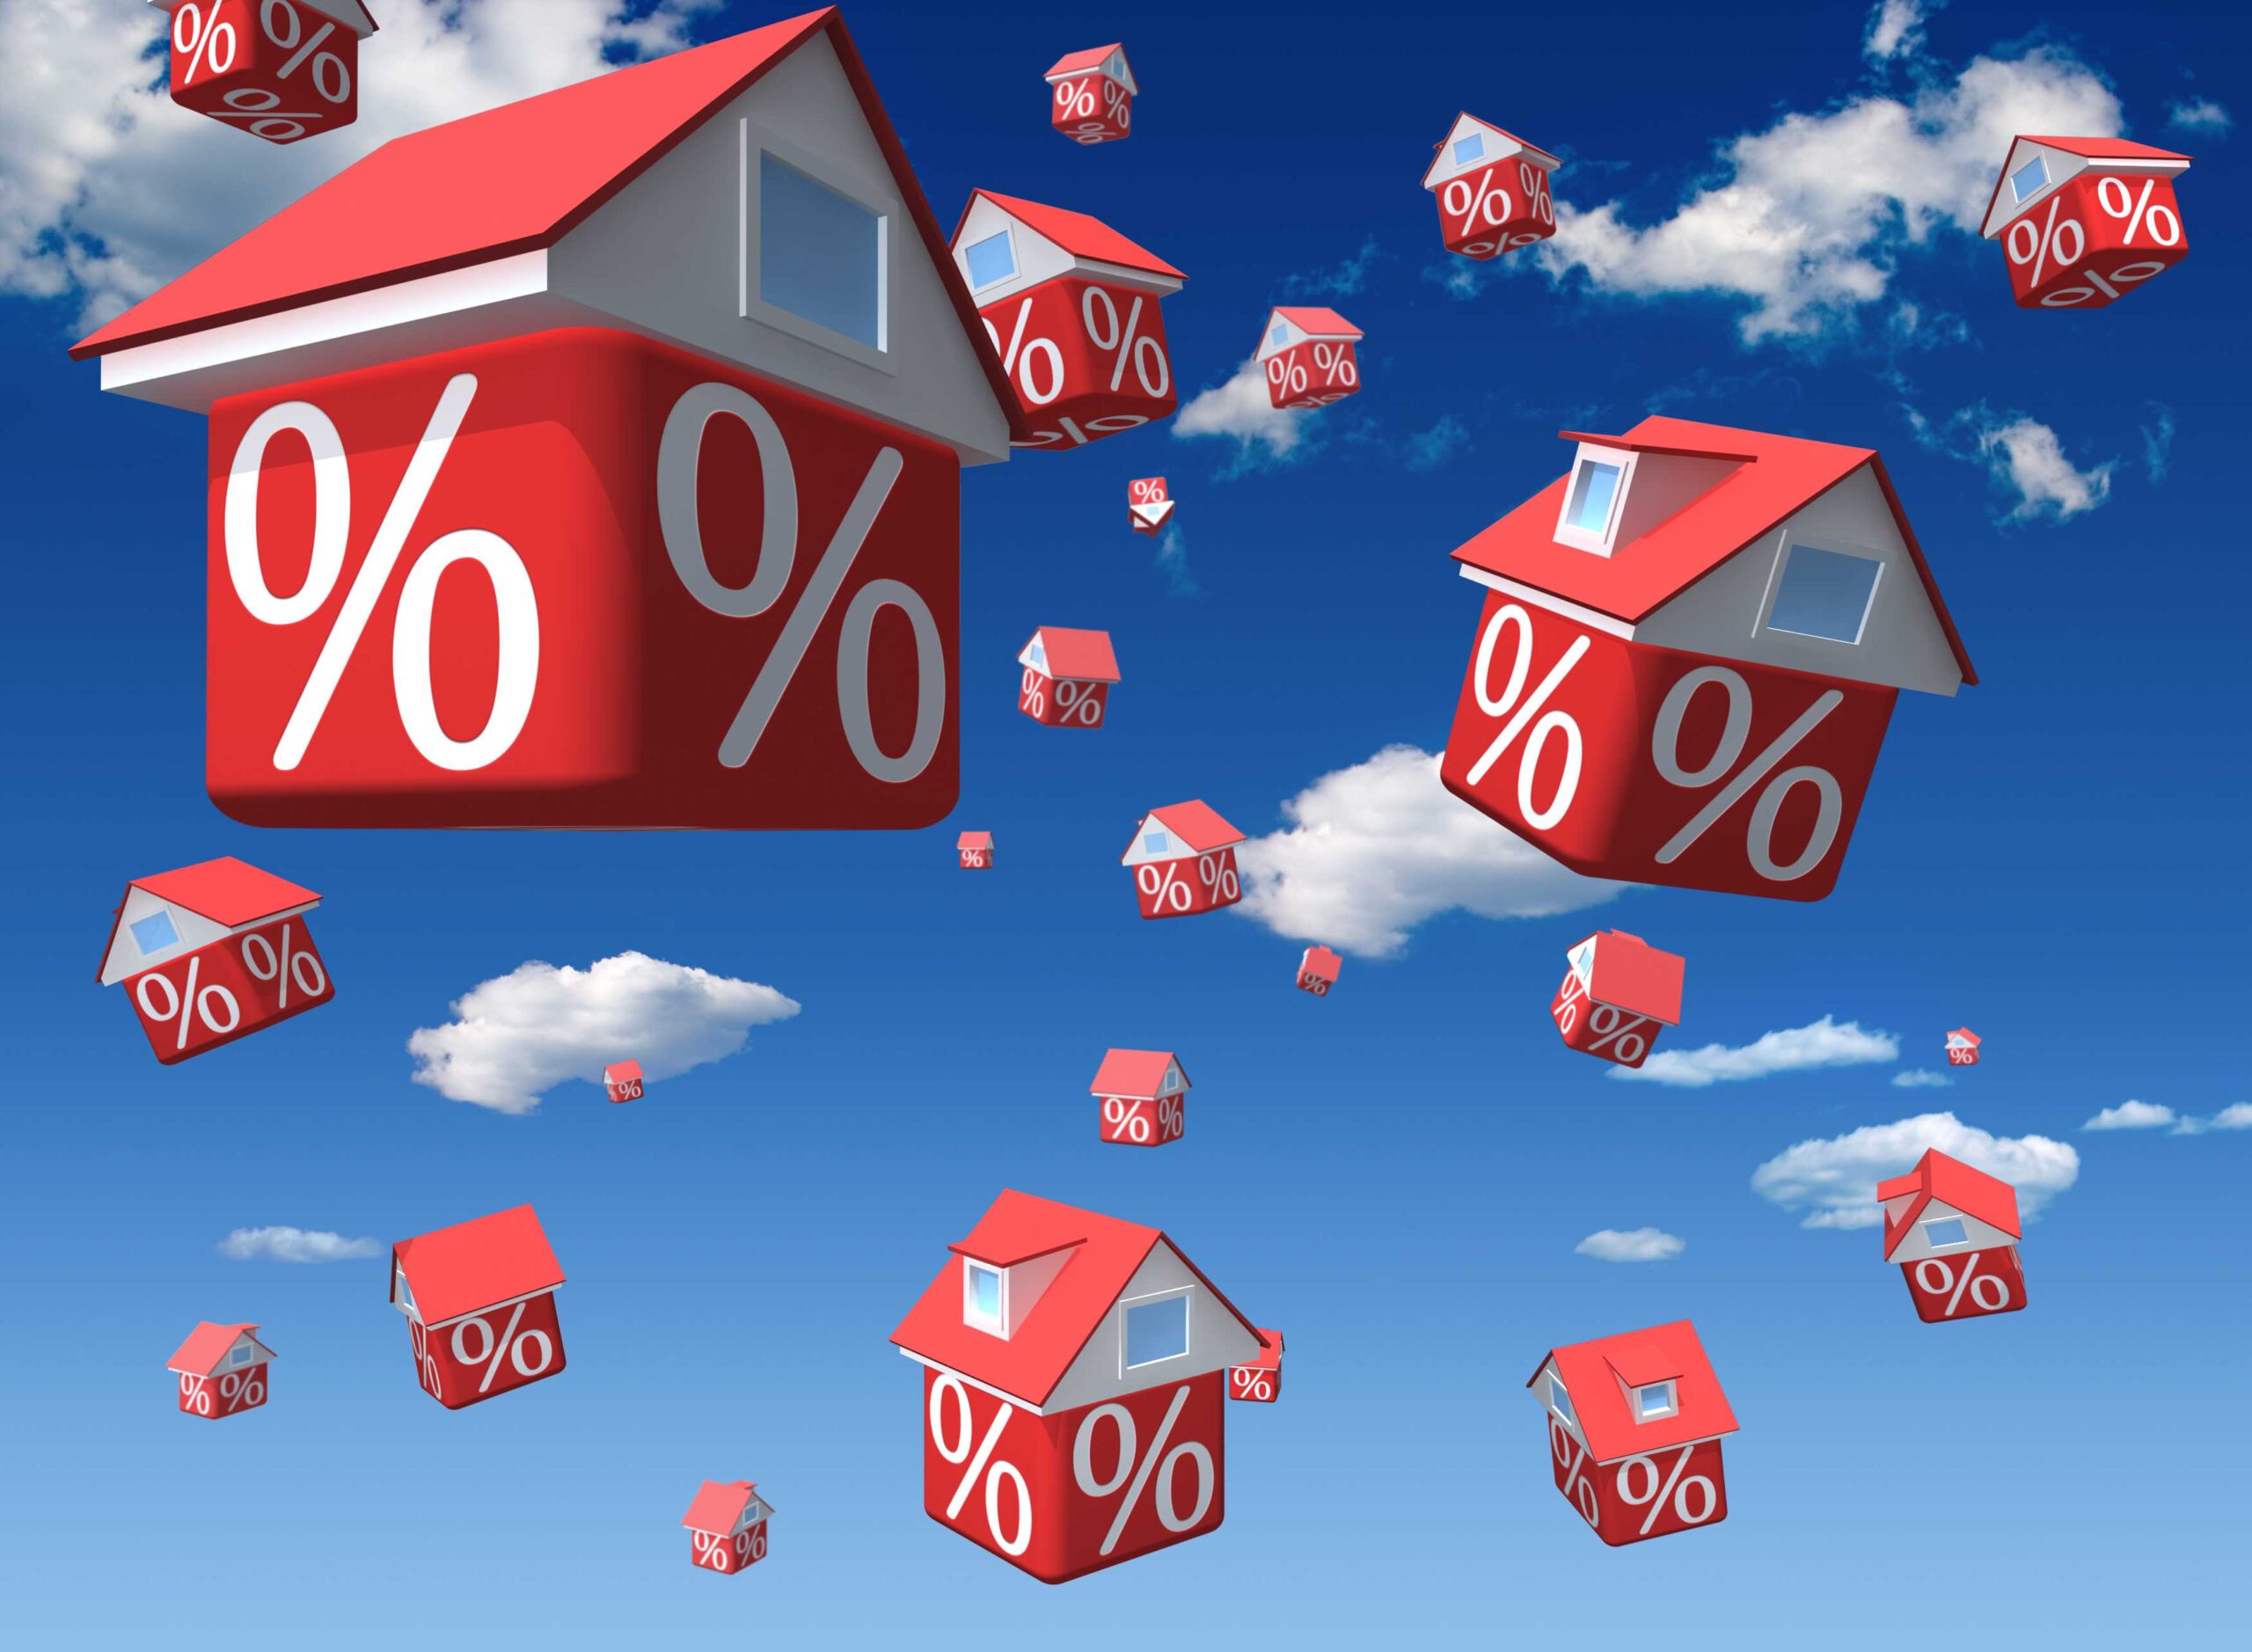 Graphic of houses falling through the sky with percentage marks on them, representing falling house prices - prospects for property investment